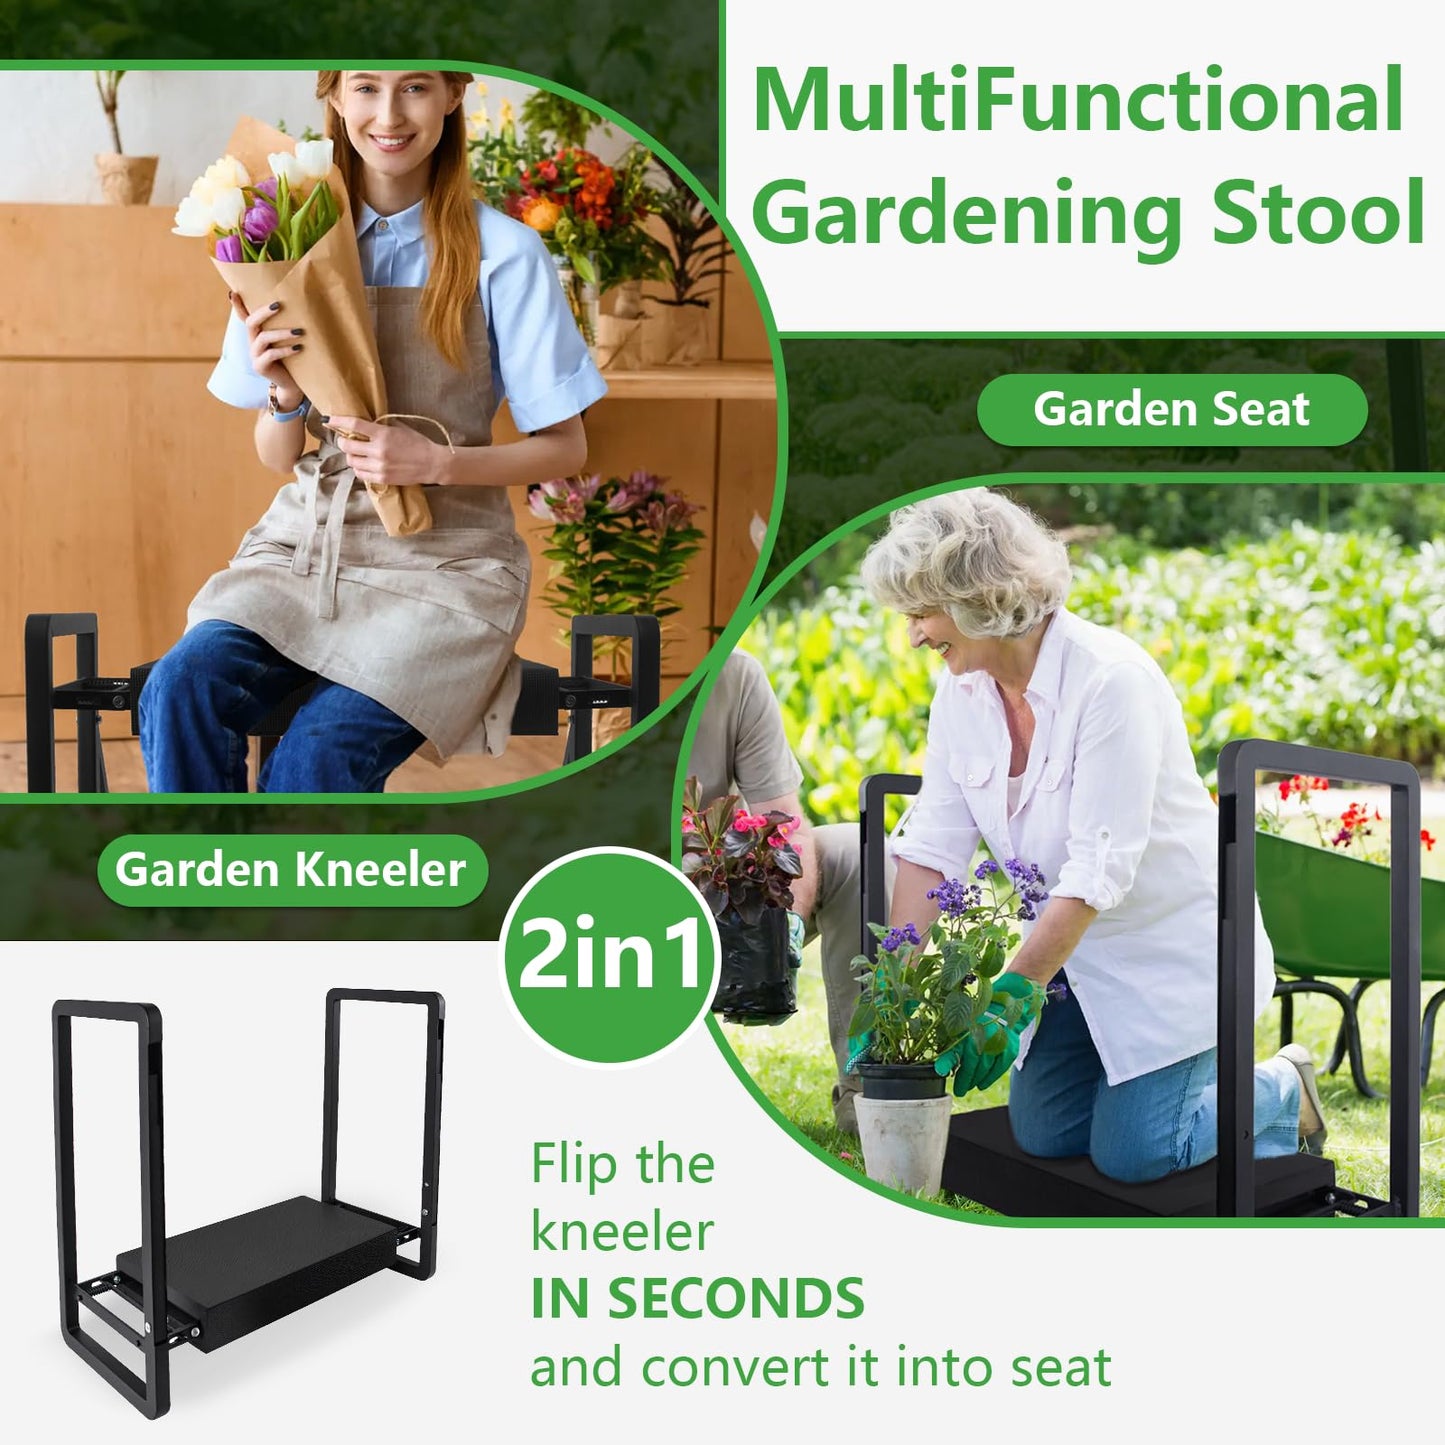 Onadak Upgraded Garden Kneeler and Seat,Foldable Garden Stool Heavy Duty Gardening Bench,Garden Kneelers for Seniors,Great Gardening Gifts for Women and Men, Bench Comes with Tool Pouch & Gloves